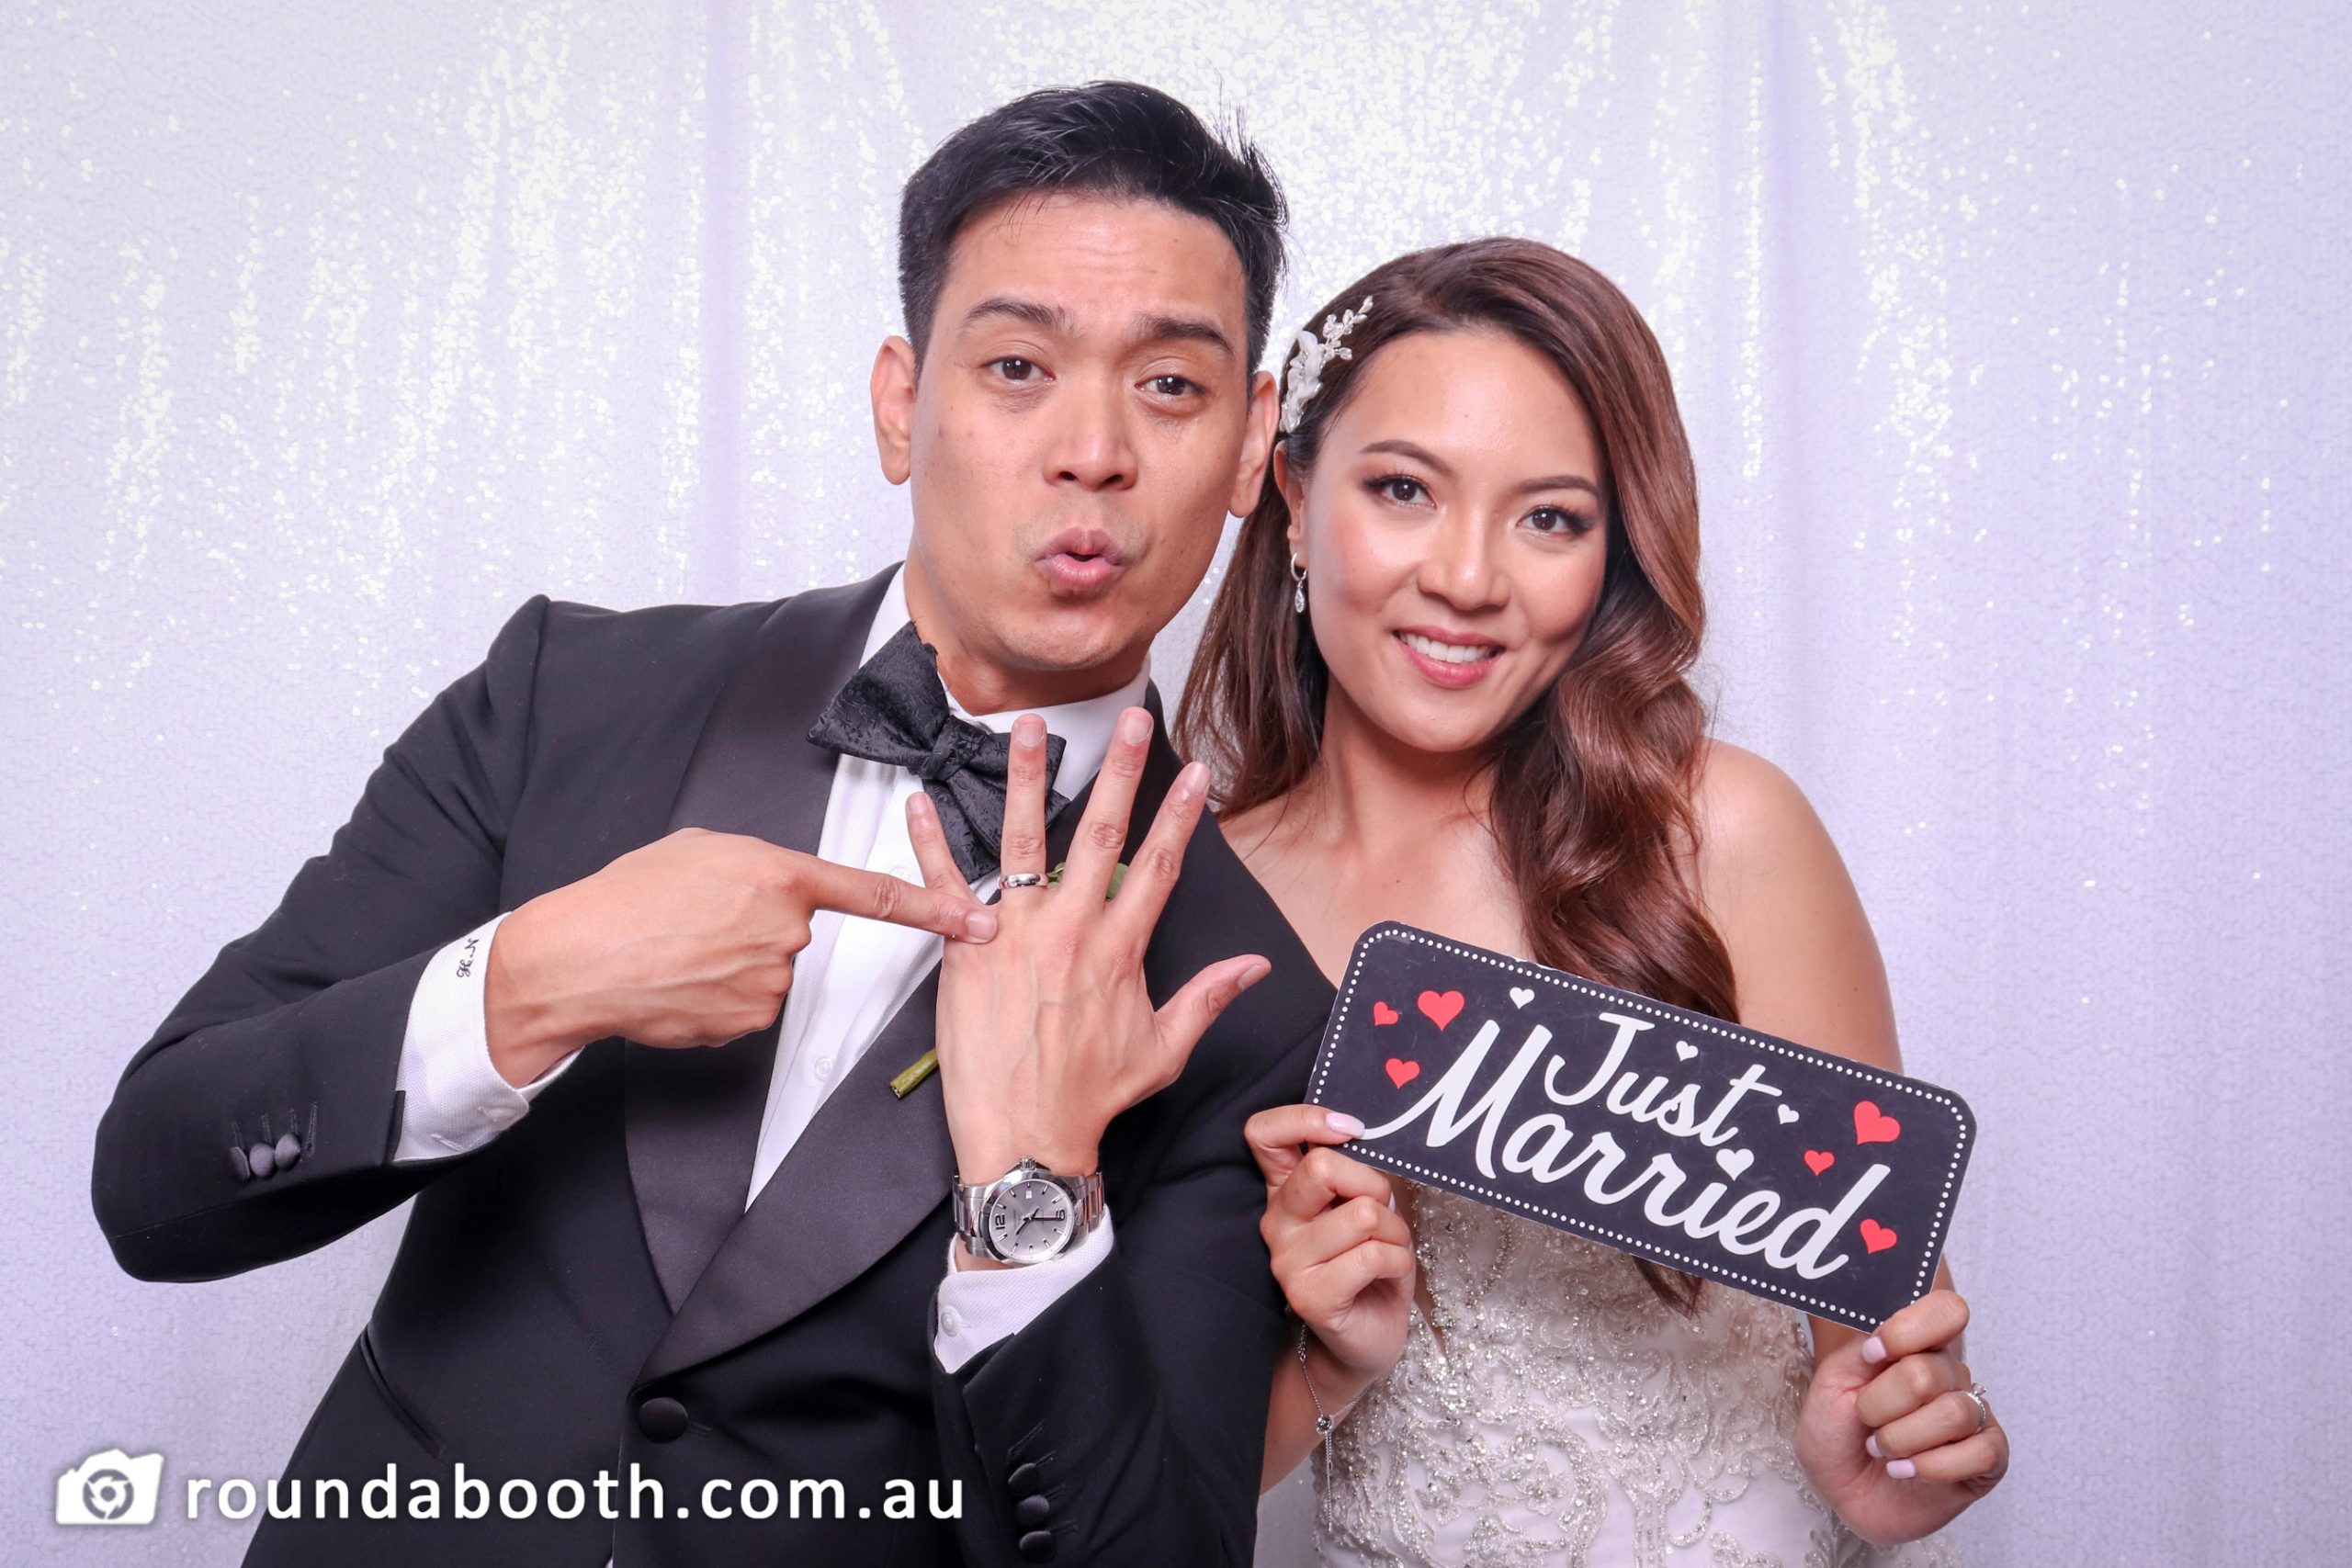 roundabooth photo booth wedding at Riverwood NSW